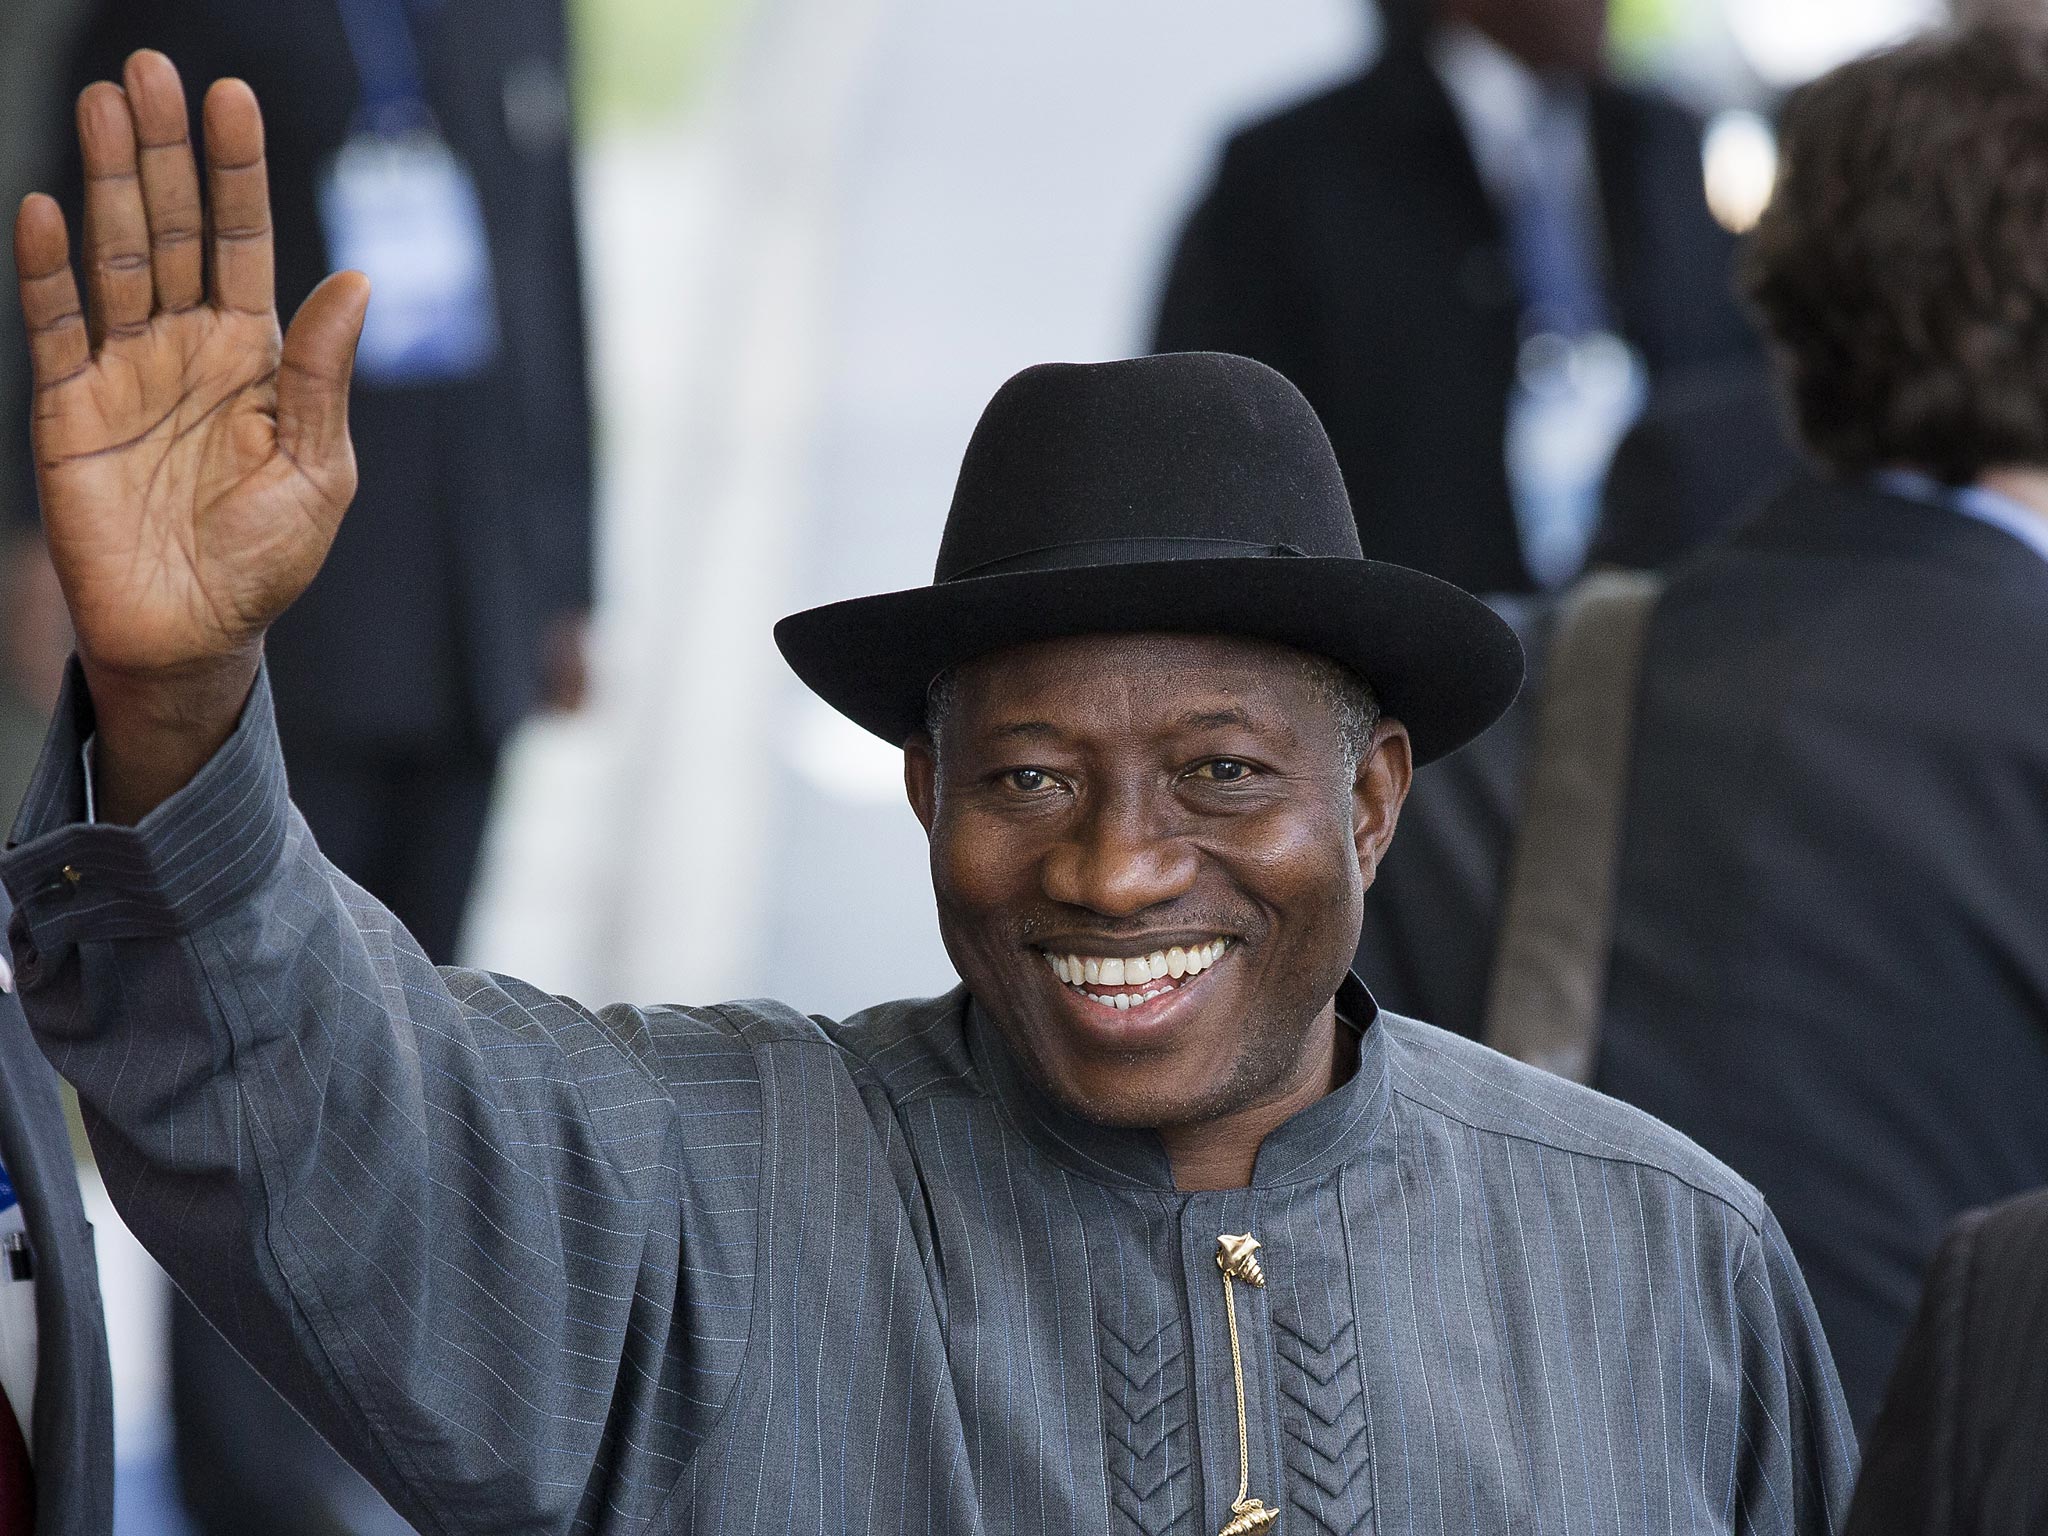 President of Nigeria Goodluck Jonathan cancelled a second visit